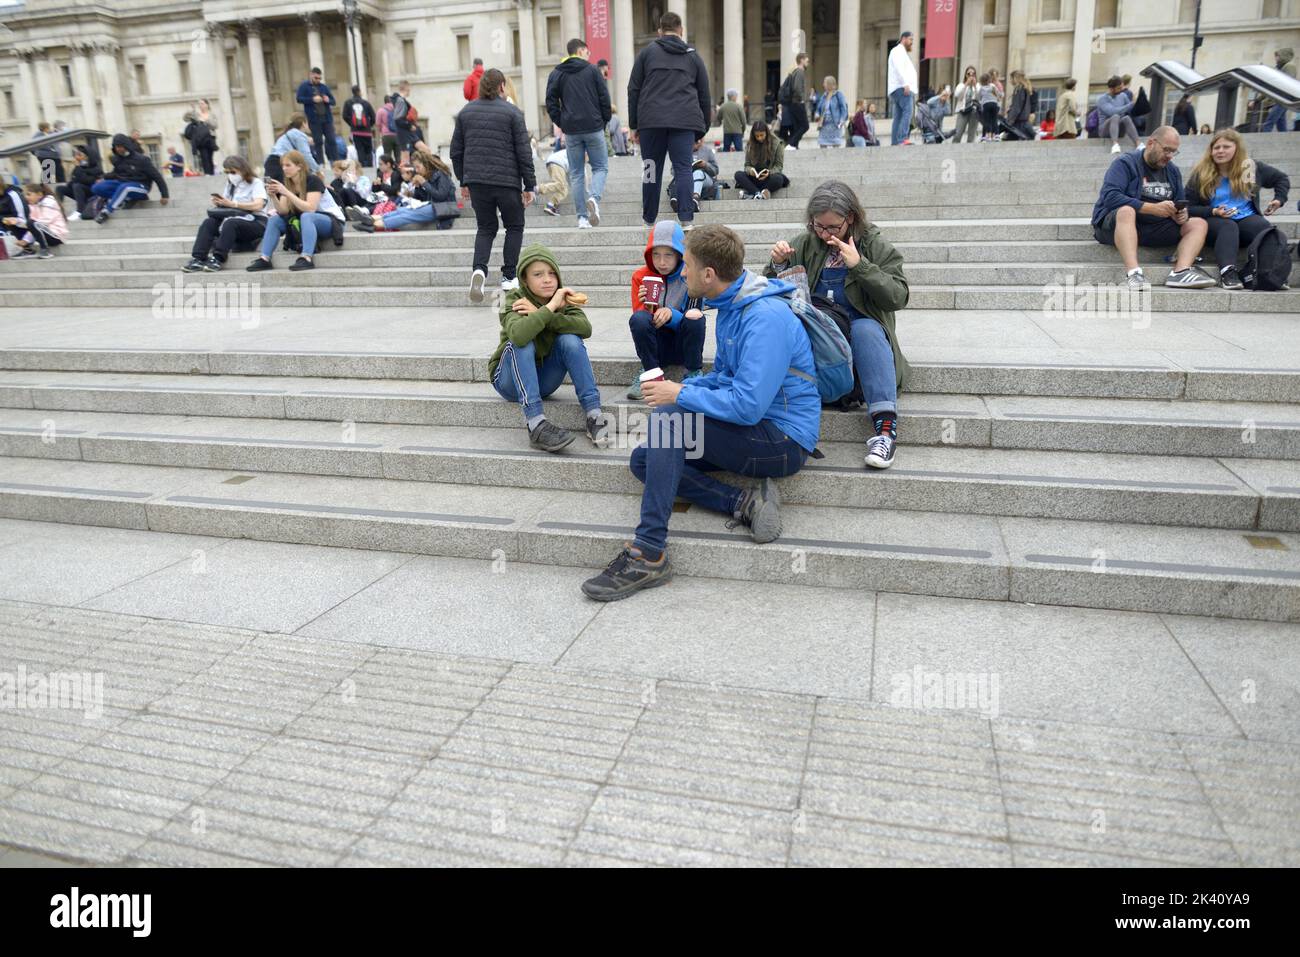 London, England, UK. Young family sitting on the steps in Trafalgar Square leading up to the National Gallery Stock Photo